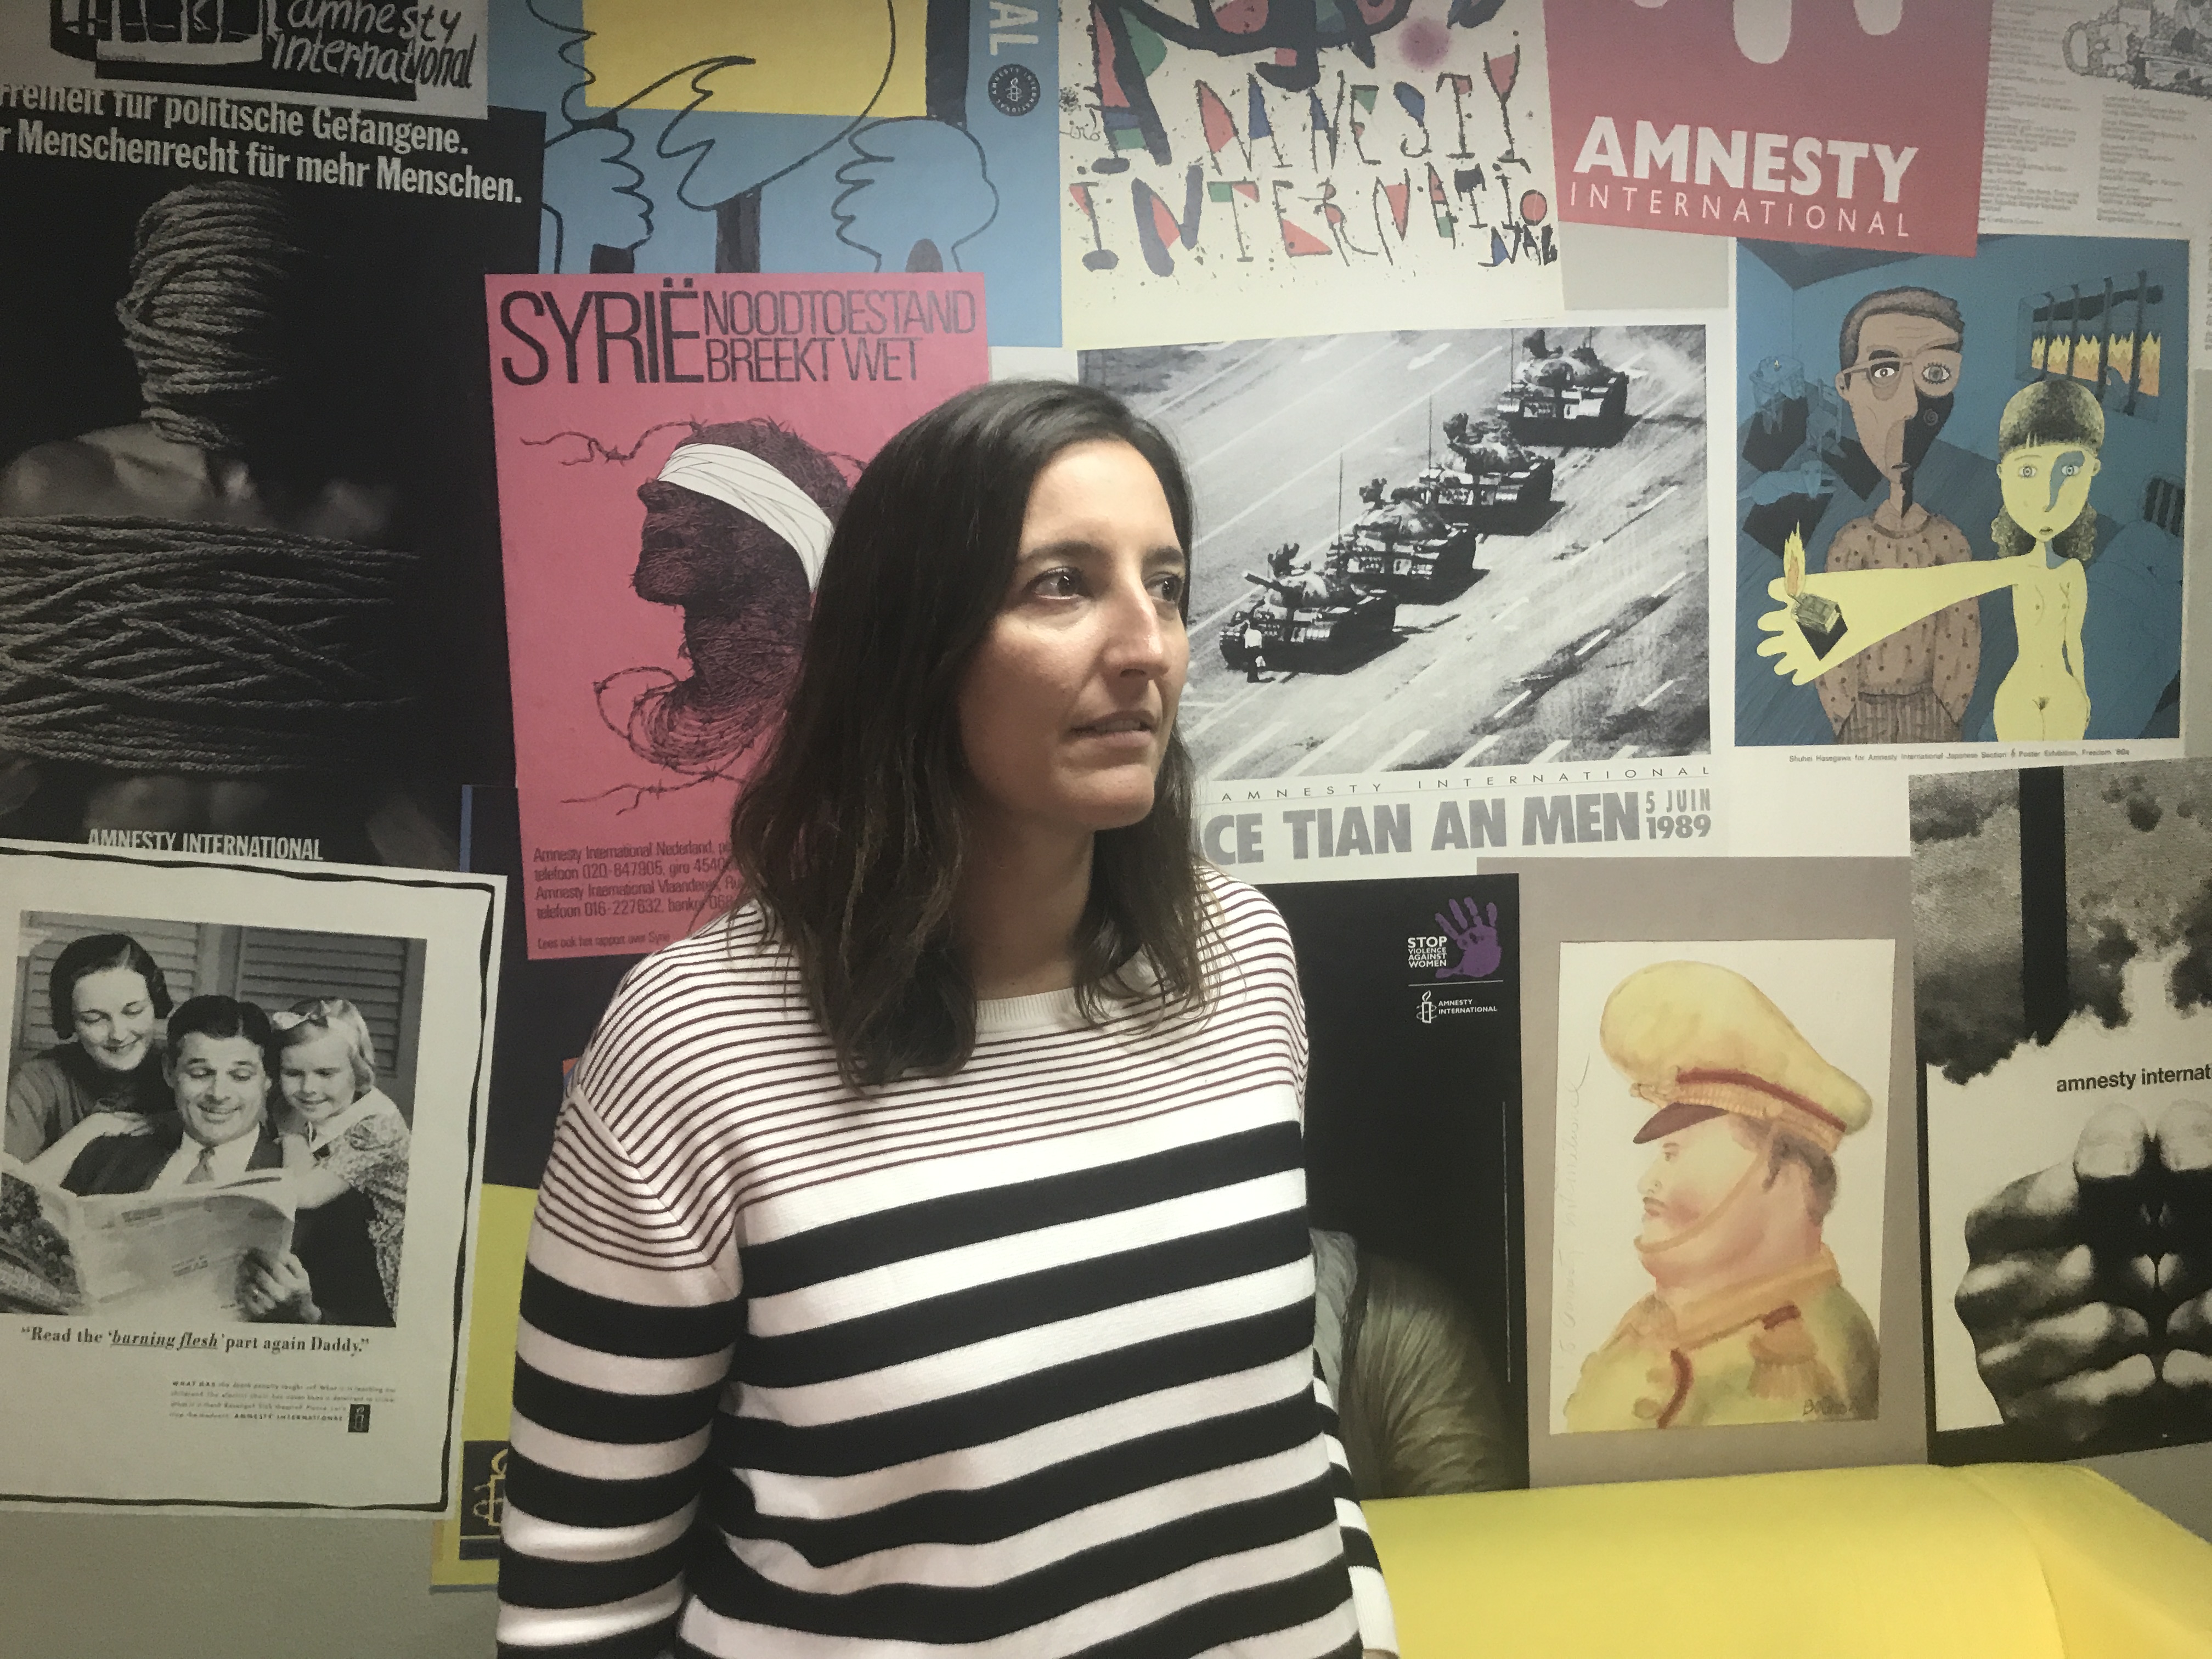 Amnesty International coordinator and spokesperson Adriana Ribas on October 21, 2019 in Barcelona (by Cristina Tomàs White)